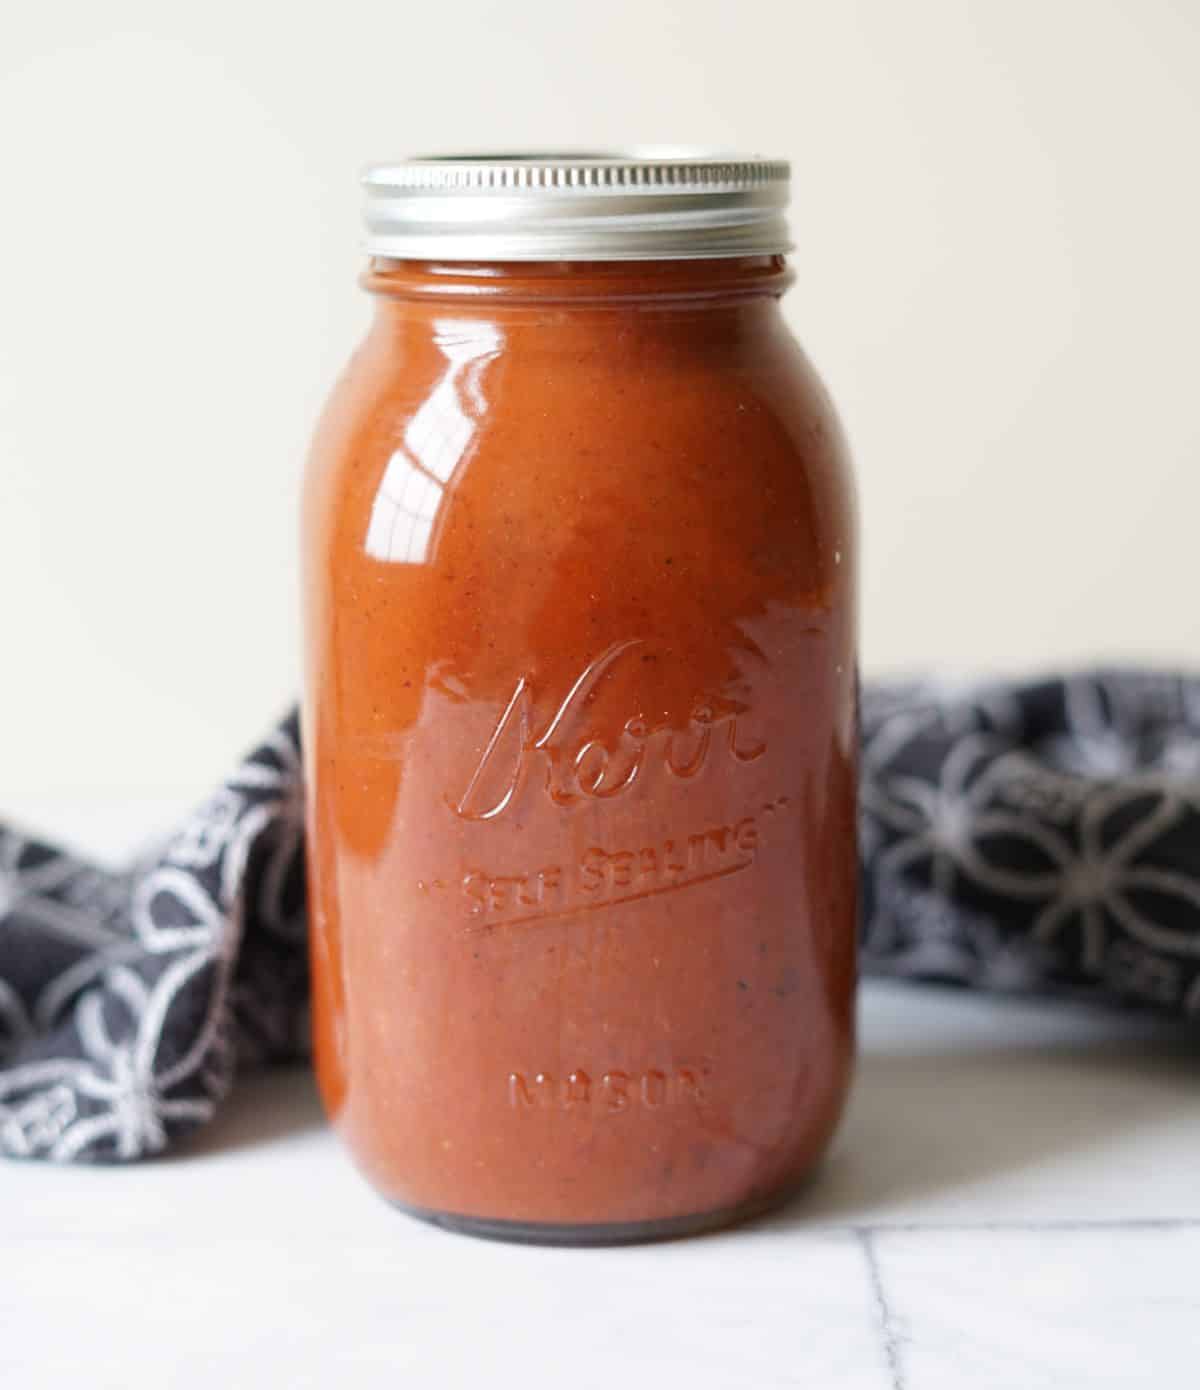 Nomato sauce in a mason jar with a black towel behind it.